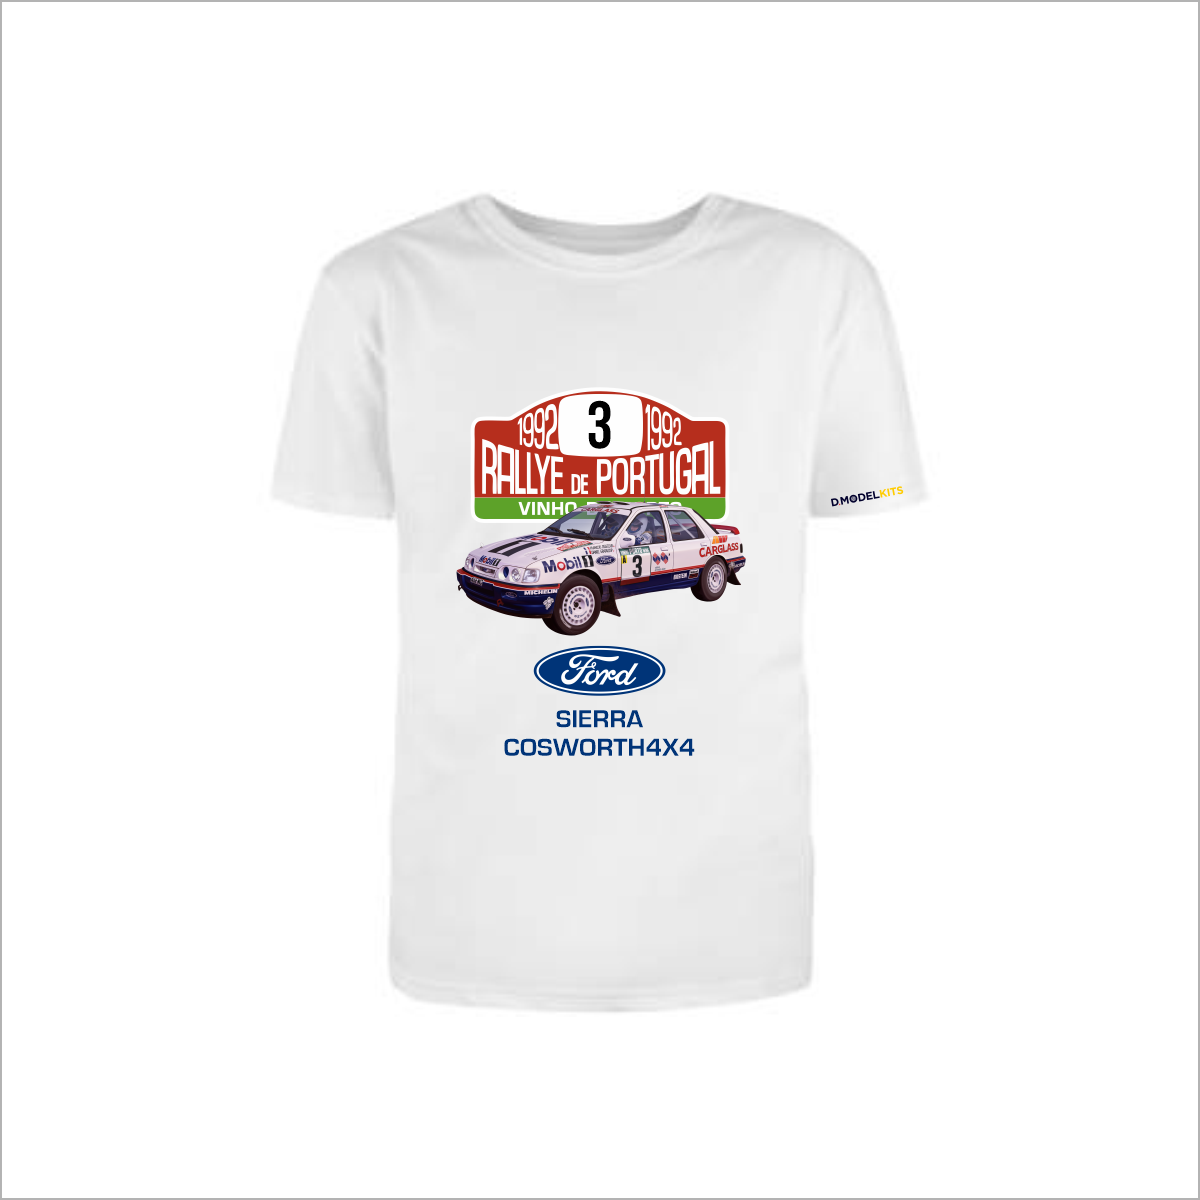 D🔻MODELKITS FORD SIERRA RALLY PORTUGAL T-SHIRT